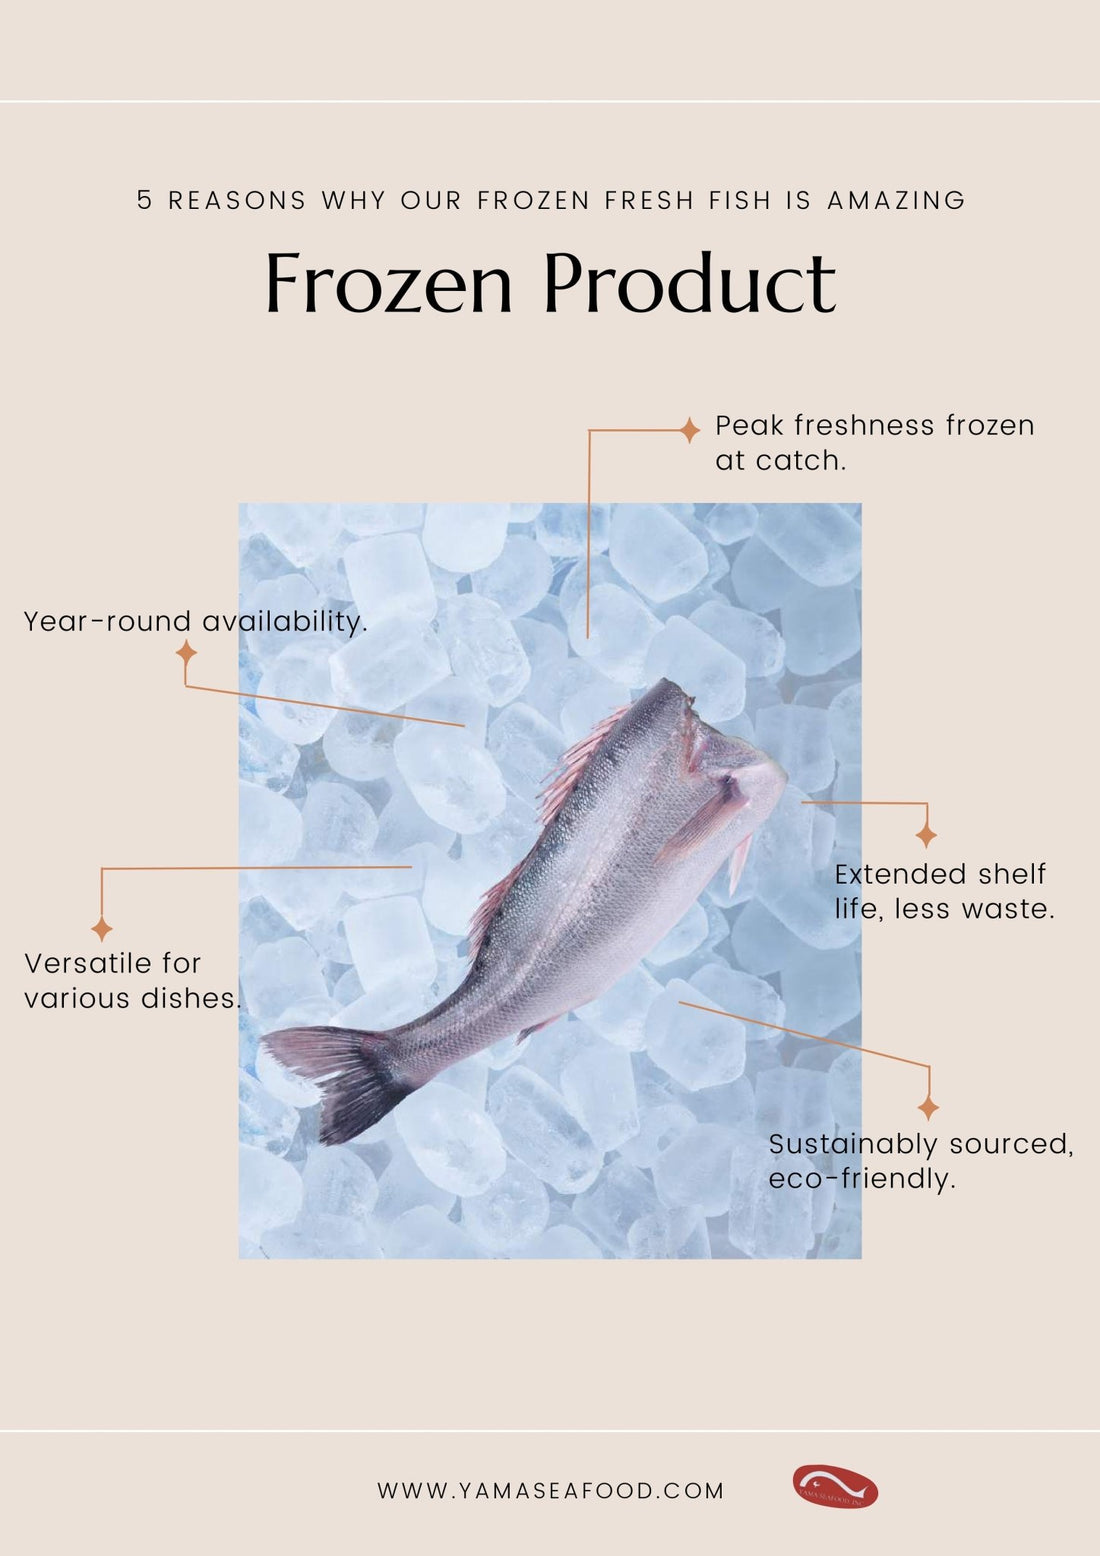 5 Reasons Why Our Frozen Fresh Fish Is Amazing